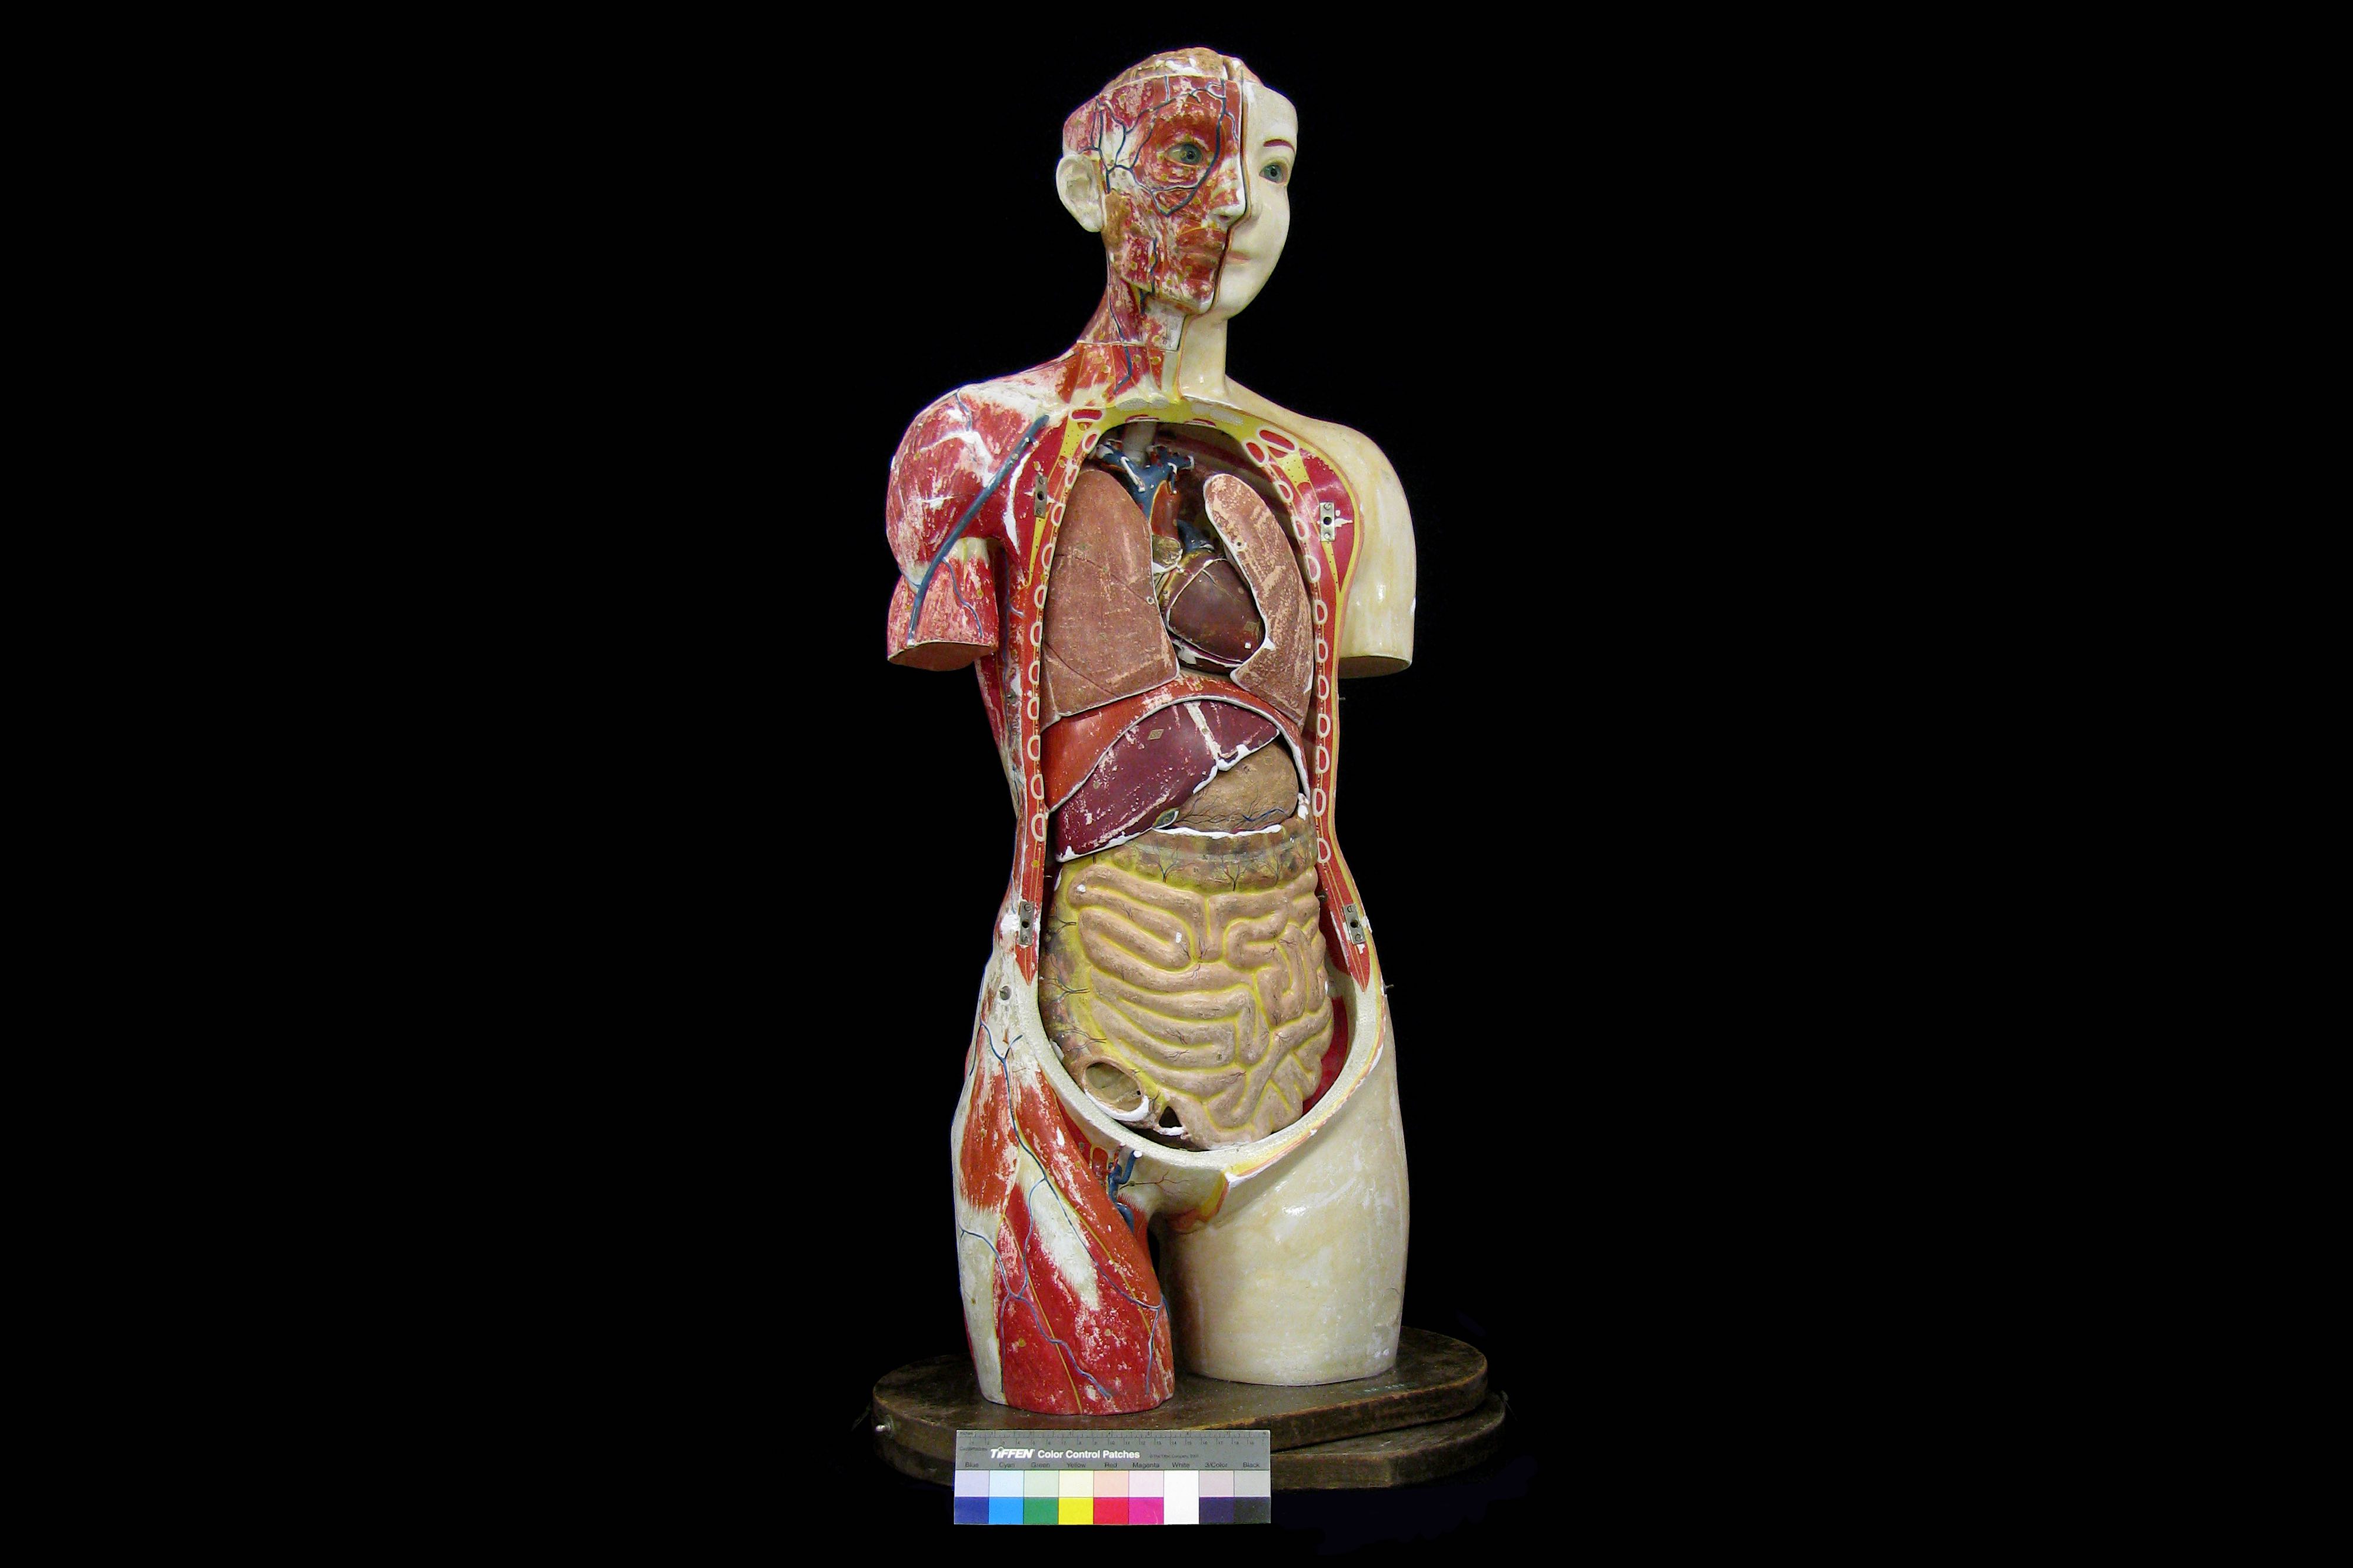 A FINE 1930'S JAPANESE LIFE-SIZE ANATOMICAL MODEL TORSO OF THE FEMALE FIGURE PRODUCED IN 1934 BY THE - Image 8 of 9